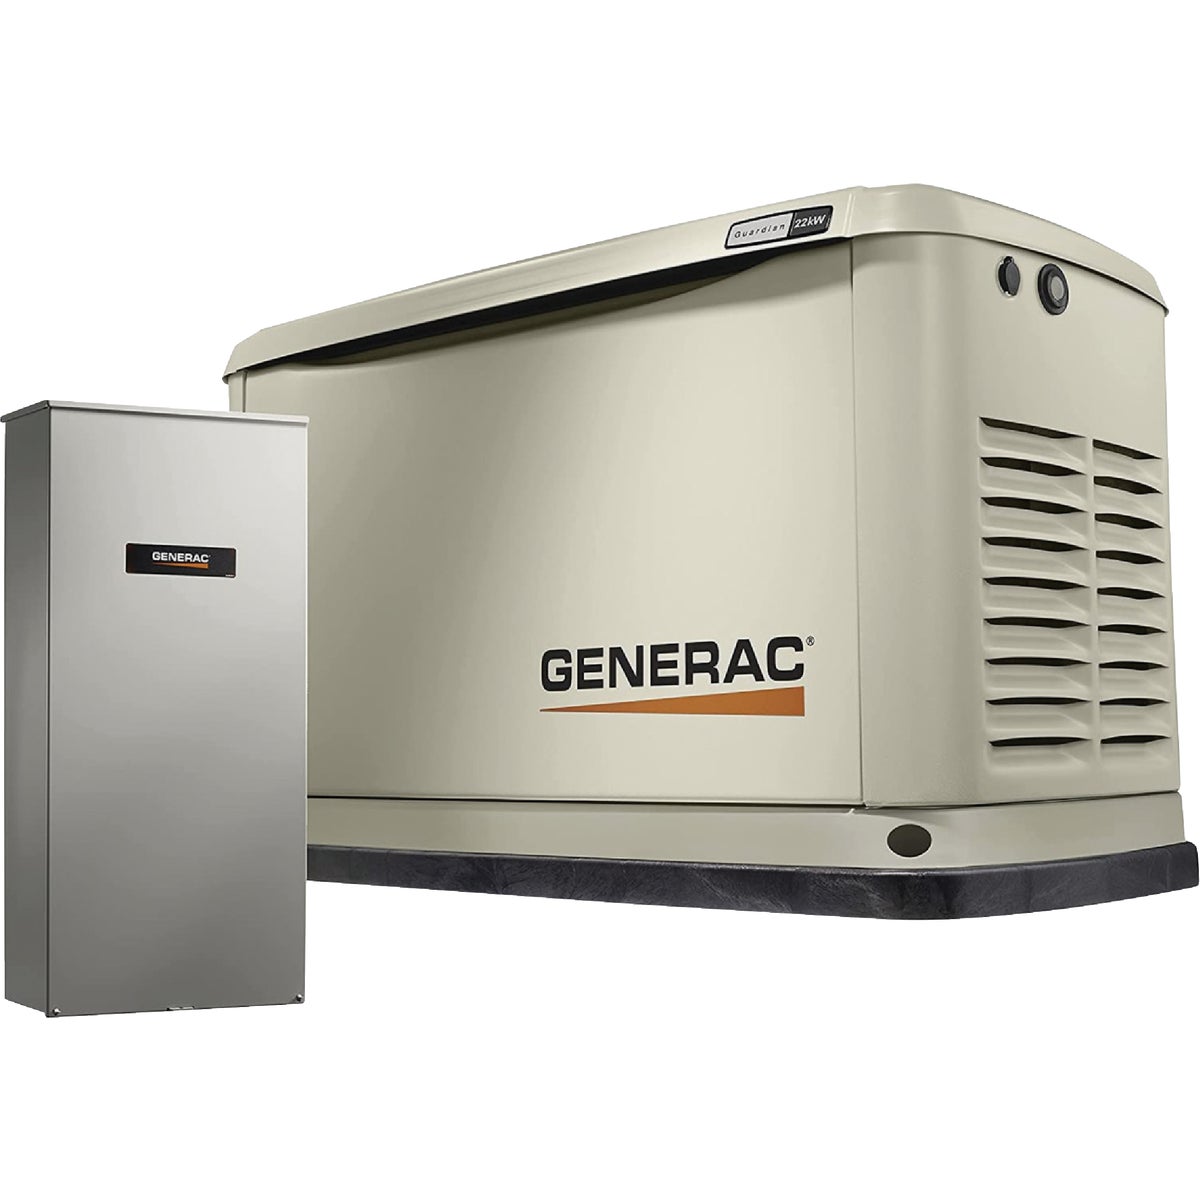 Item 502846, 22,000-watt standby generator with 200-amp automatic transfer switch and 